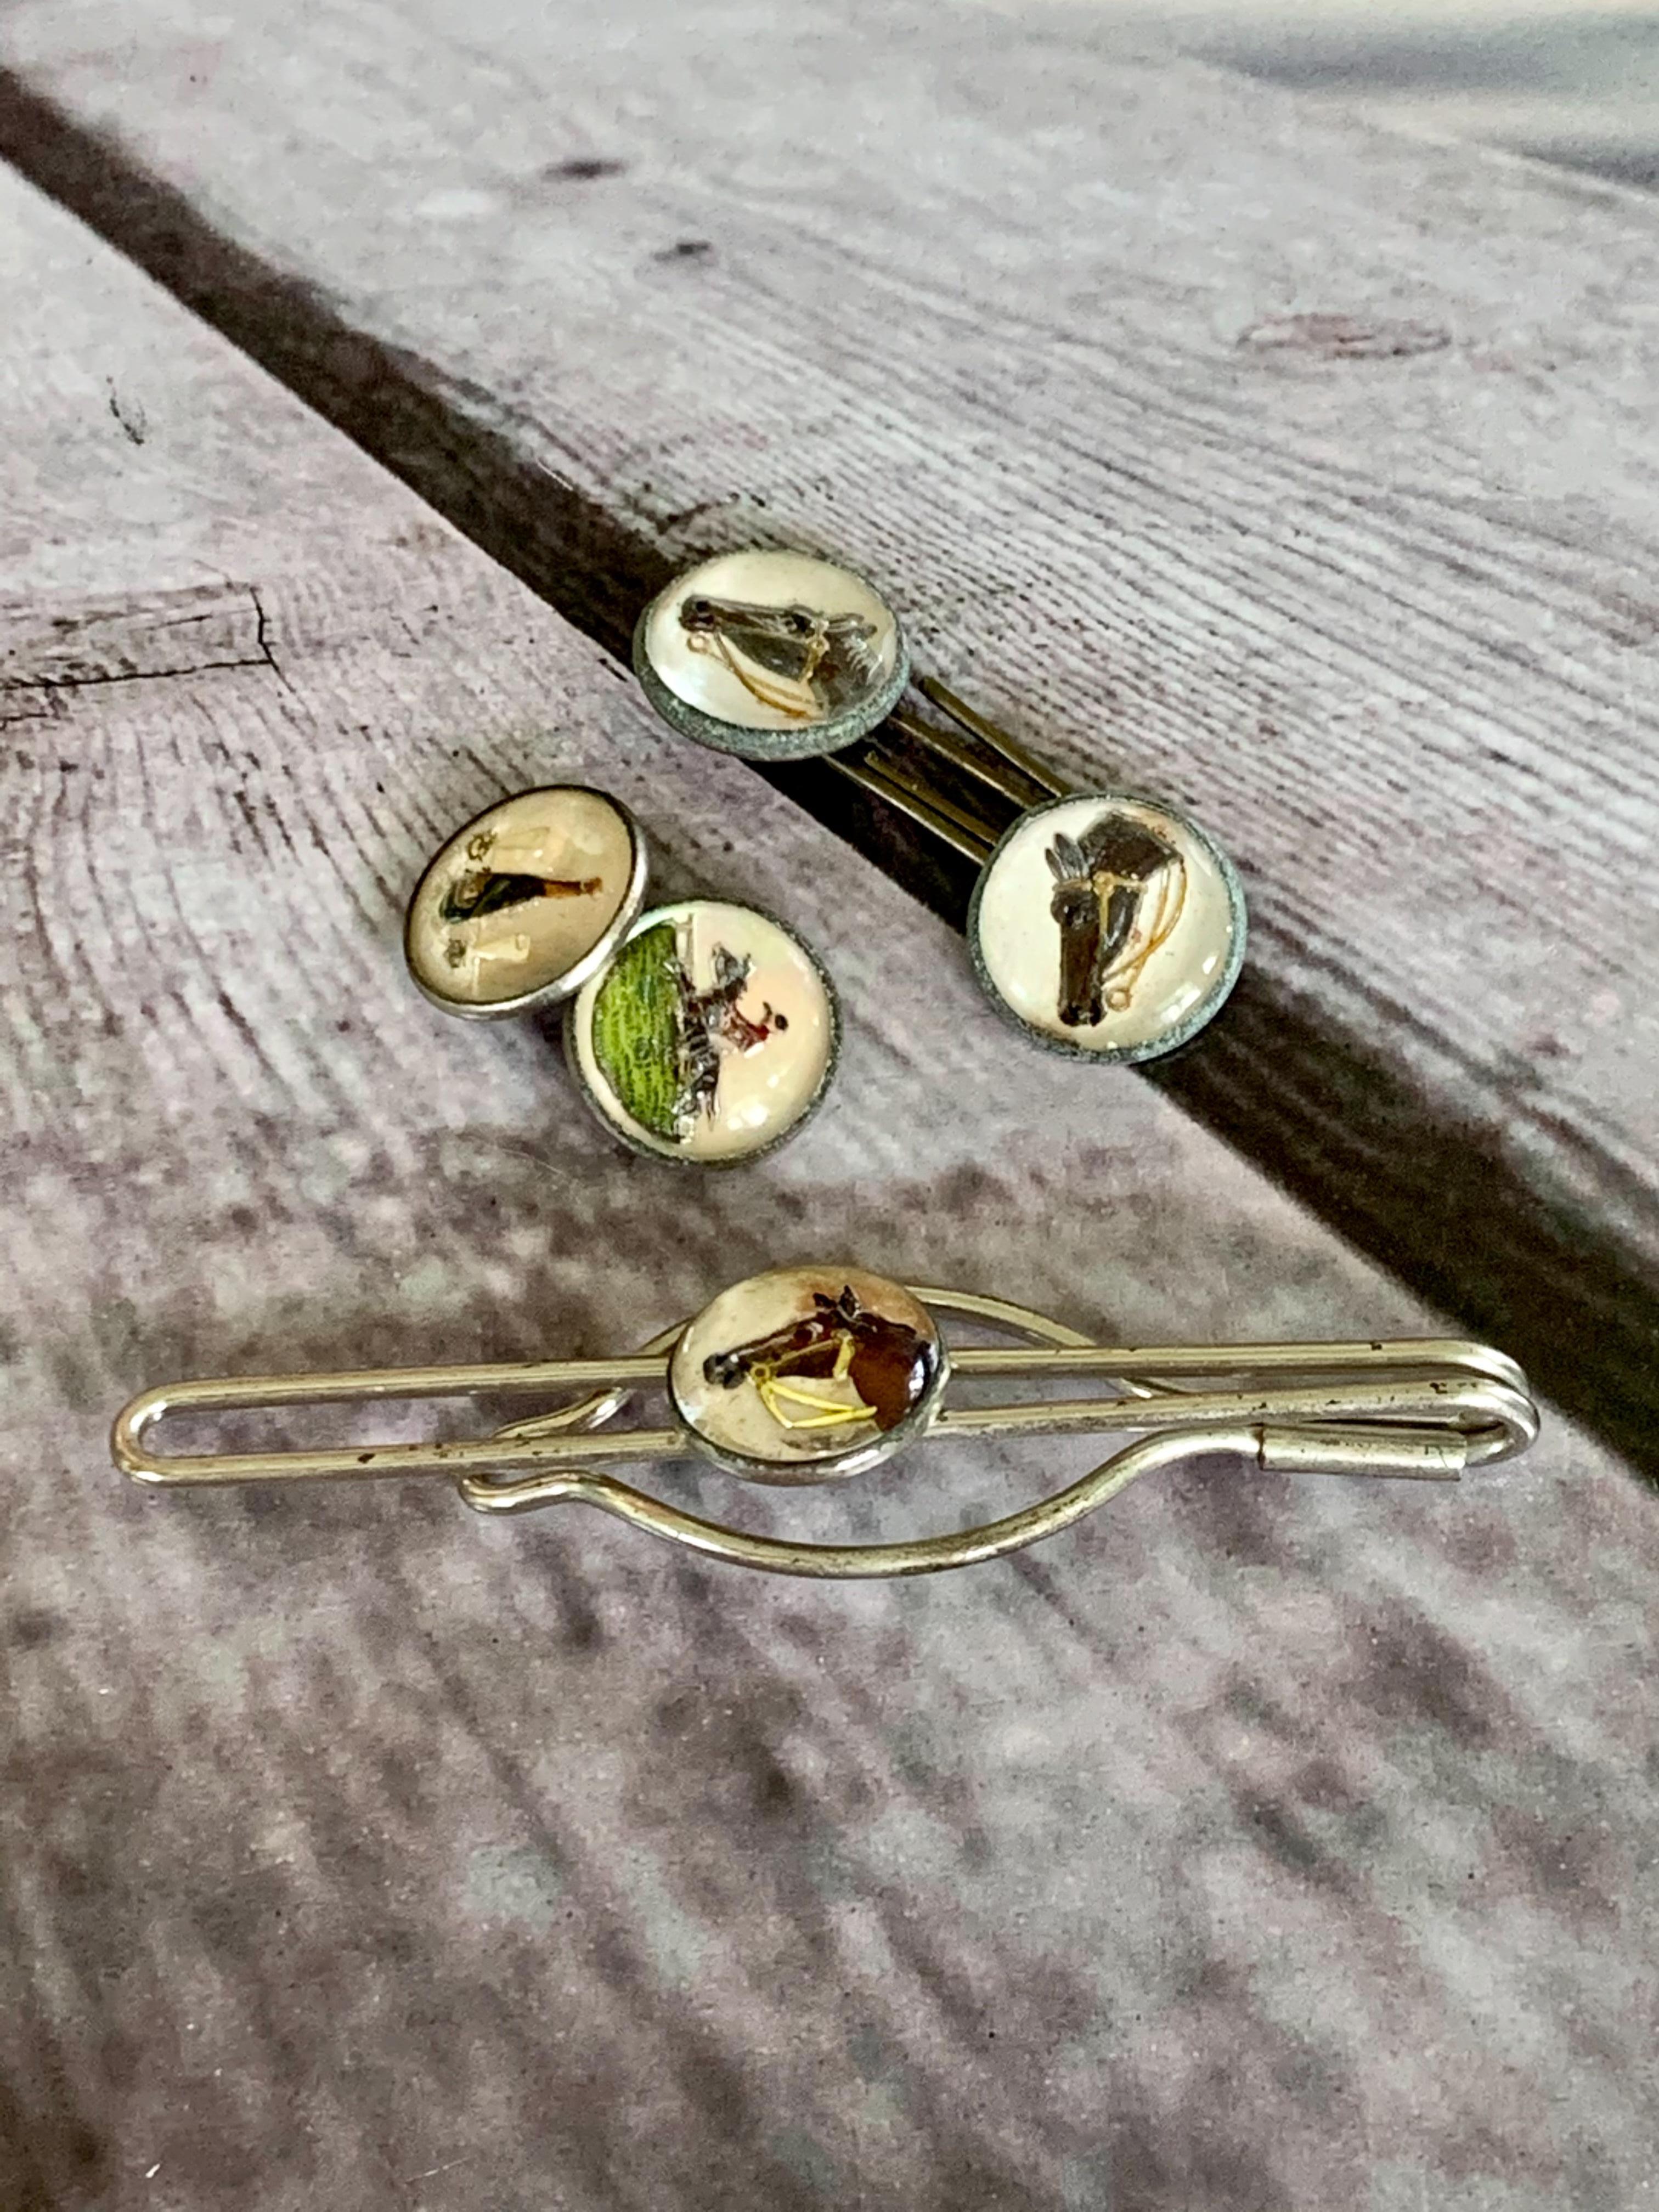 These classic vintage Silver Essex Crystal cufflink and tie clip components feature horses and celebratory scenes.  This is not a full set, but these pieces would be fantastic for repurposing or for spare parts.

No stamp

Face measures 1/2